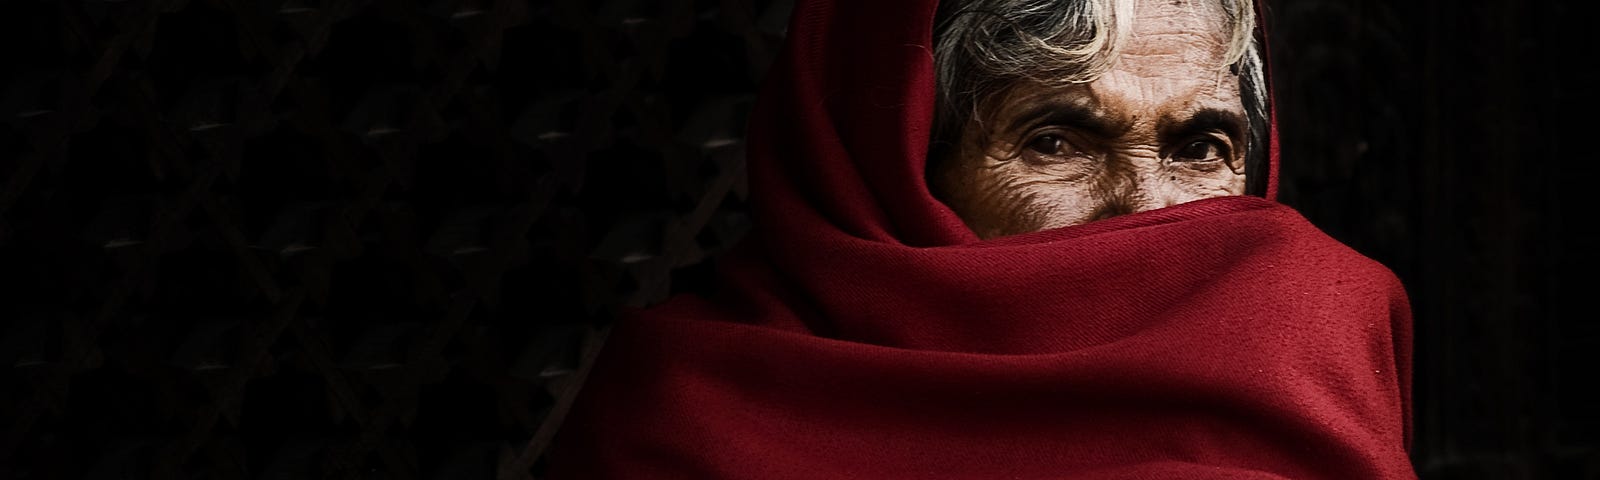 Old Tibetan woman half face covered, looking straight at the camera. The Tao — Why search for a new consciousness, when we are already conscious?